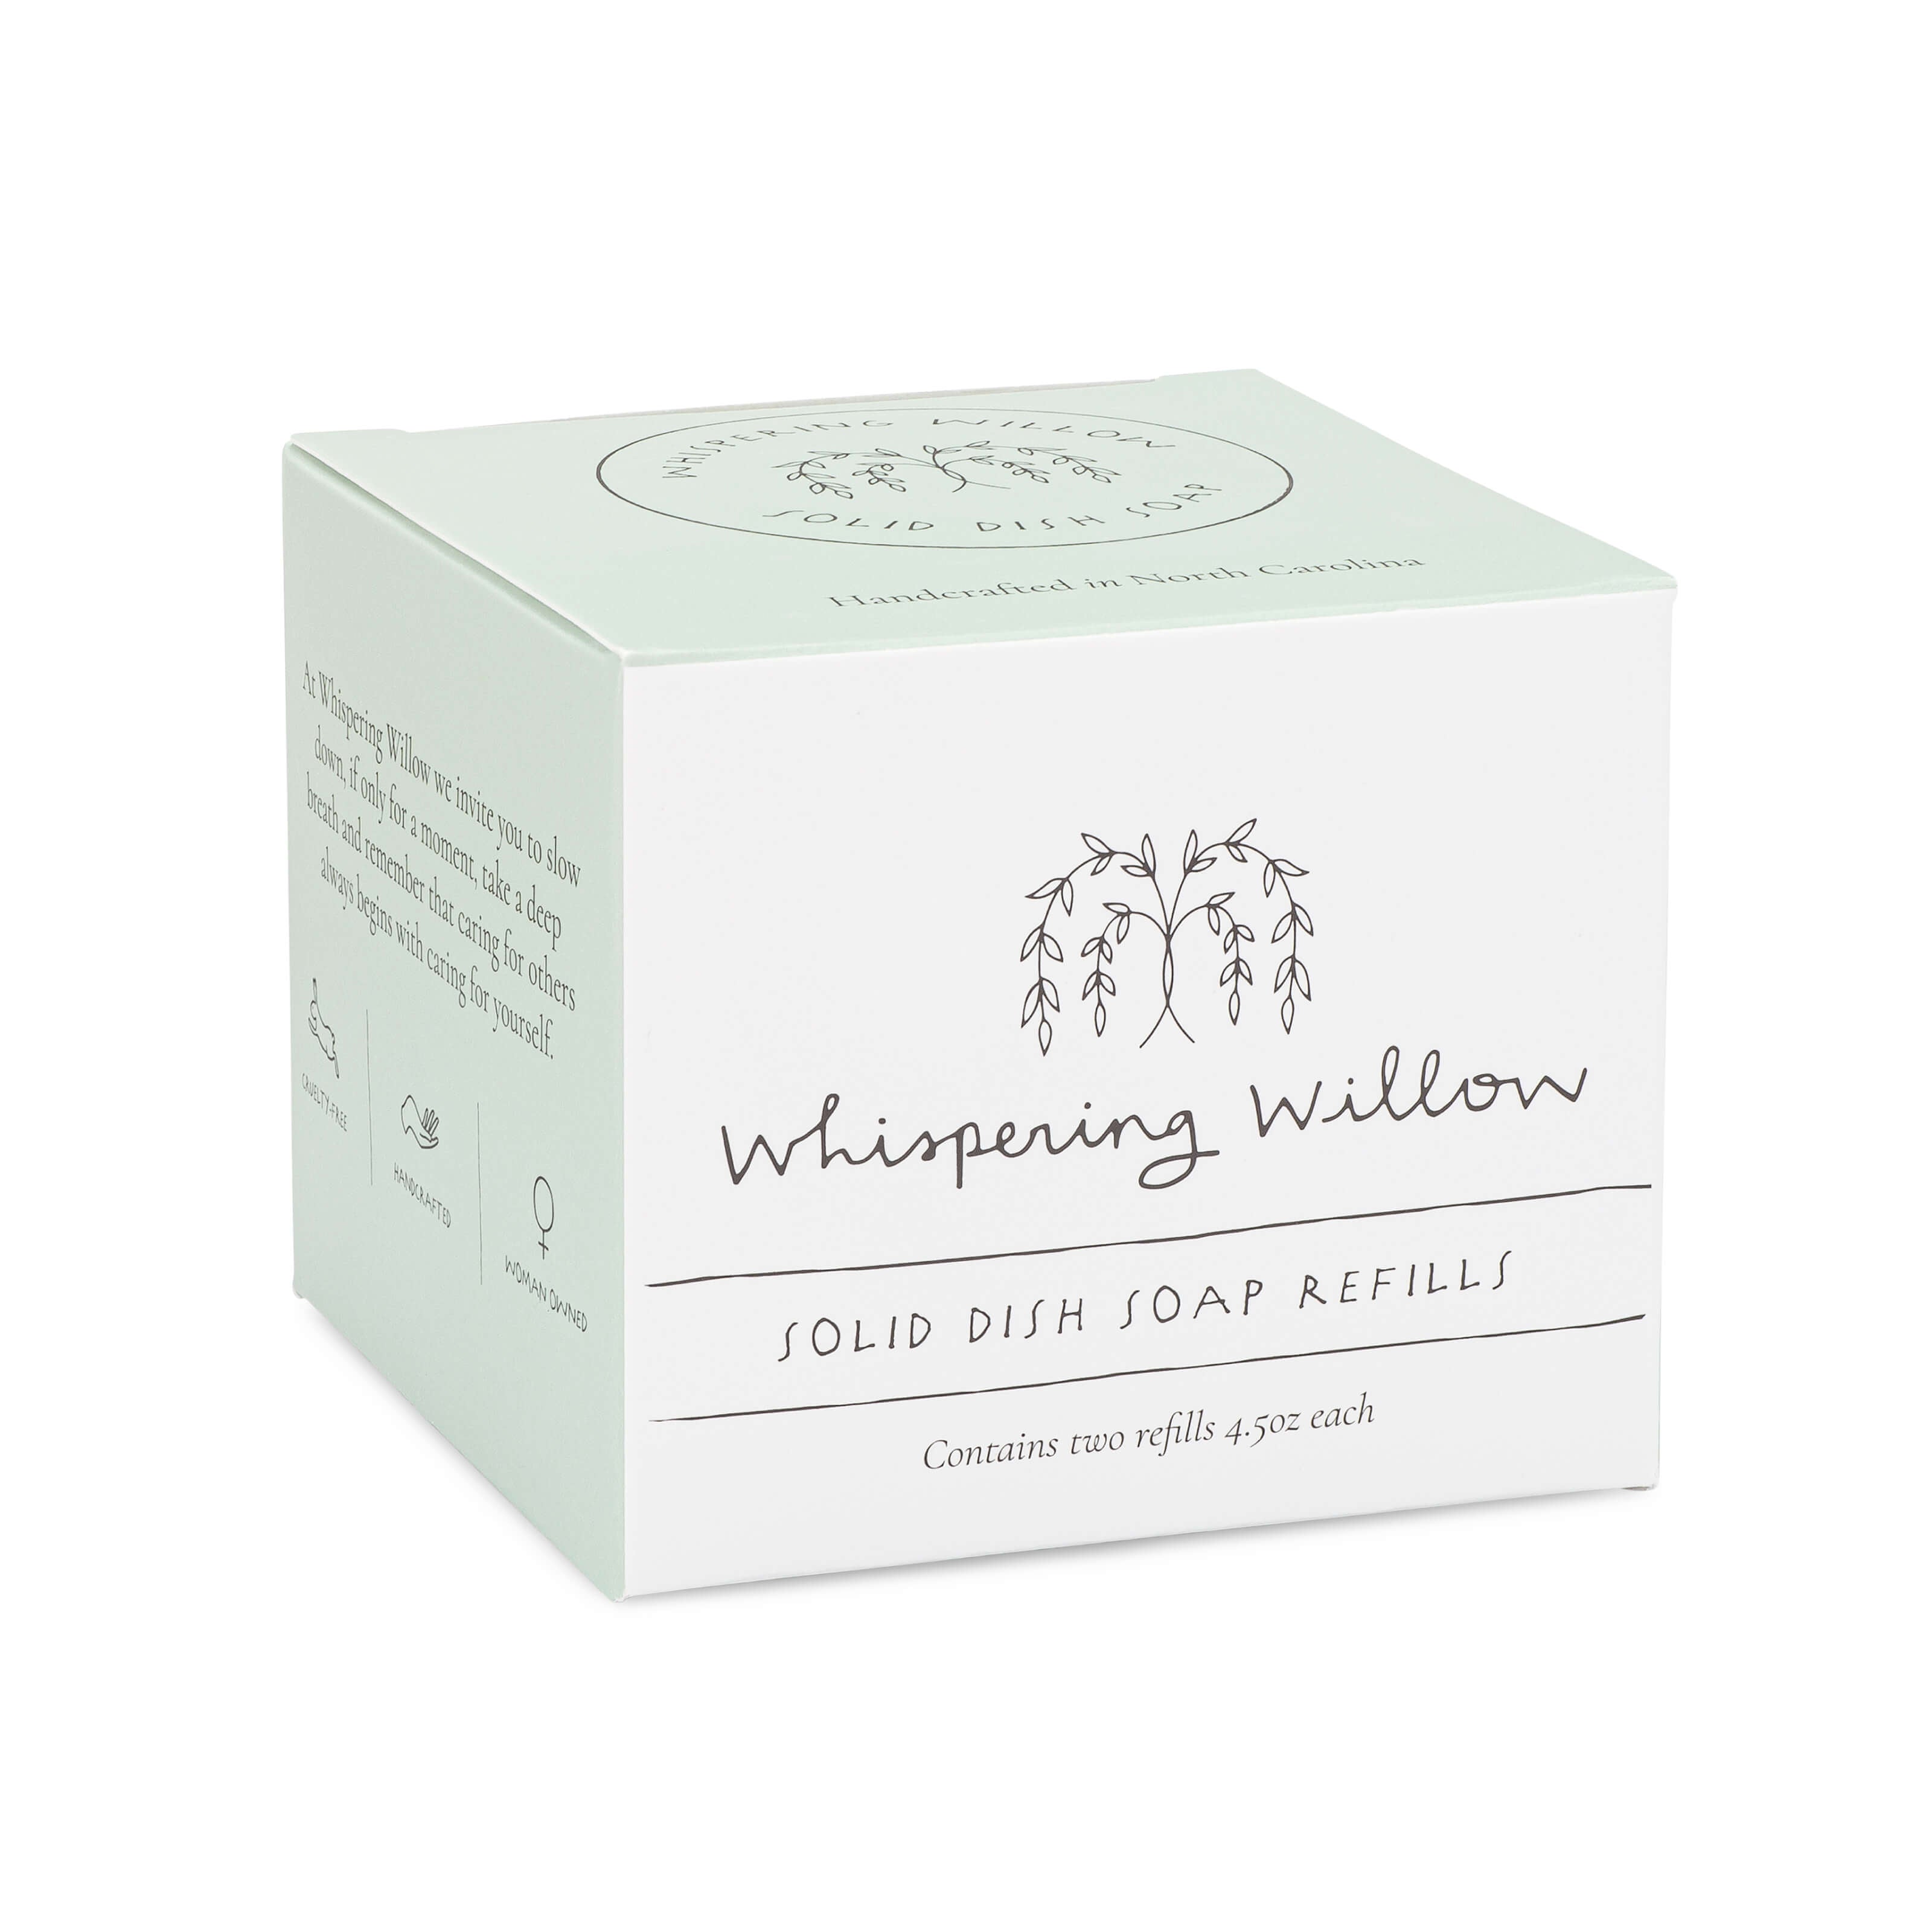 Whispering Willow Lemon Solid Dish Soap Refills - Plastic-free, plant-powered & naturally clean. Long-lasting, gentle on hands. Shop now & clean sustainably!